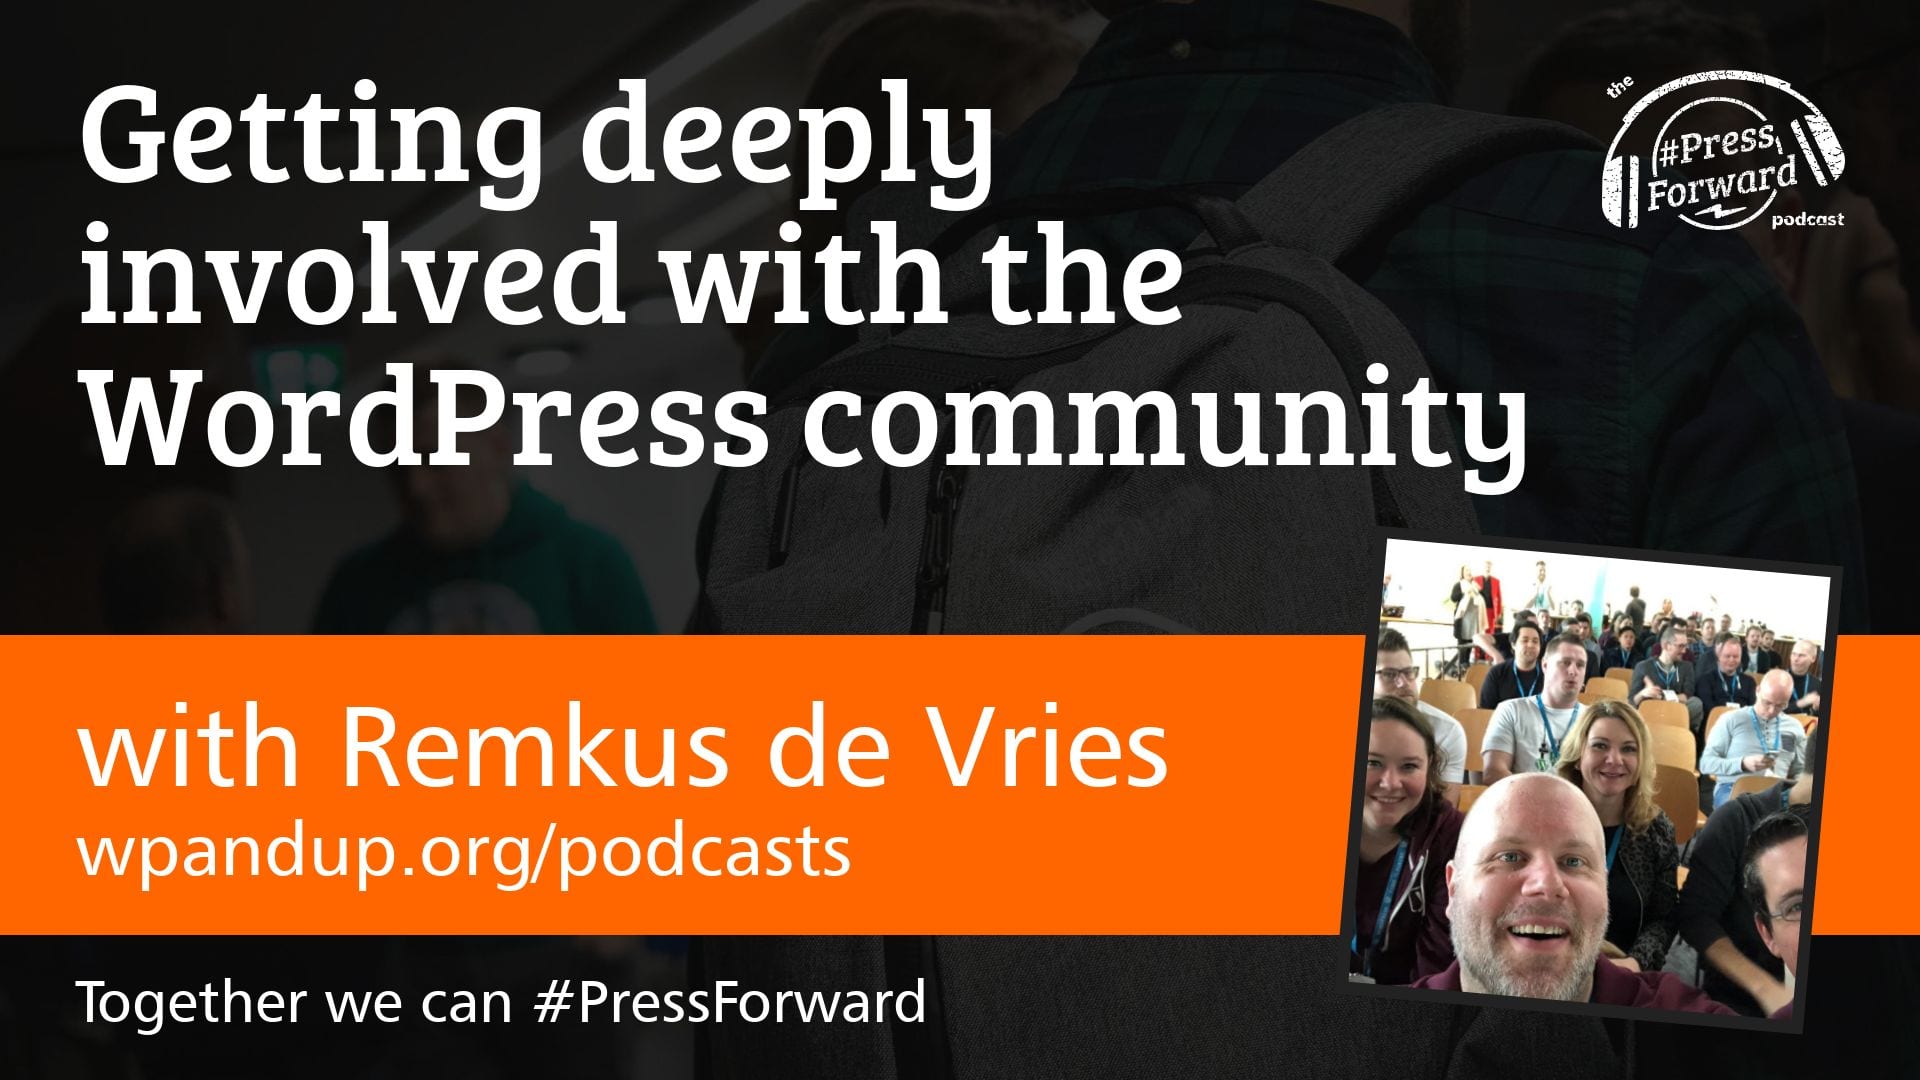 Getting deeply involved with the WordPress community - #010